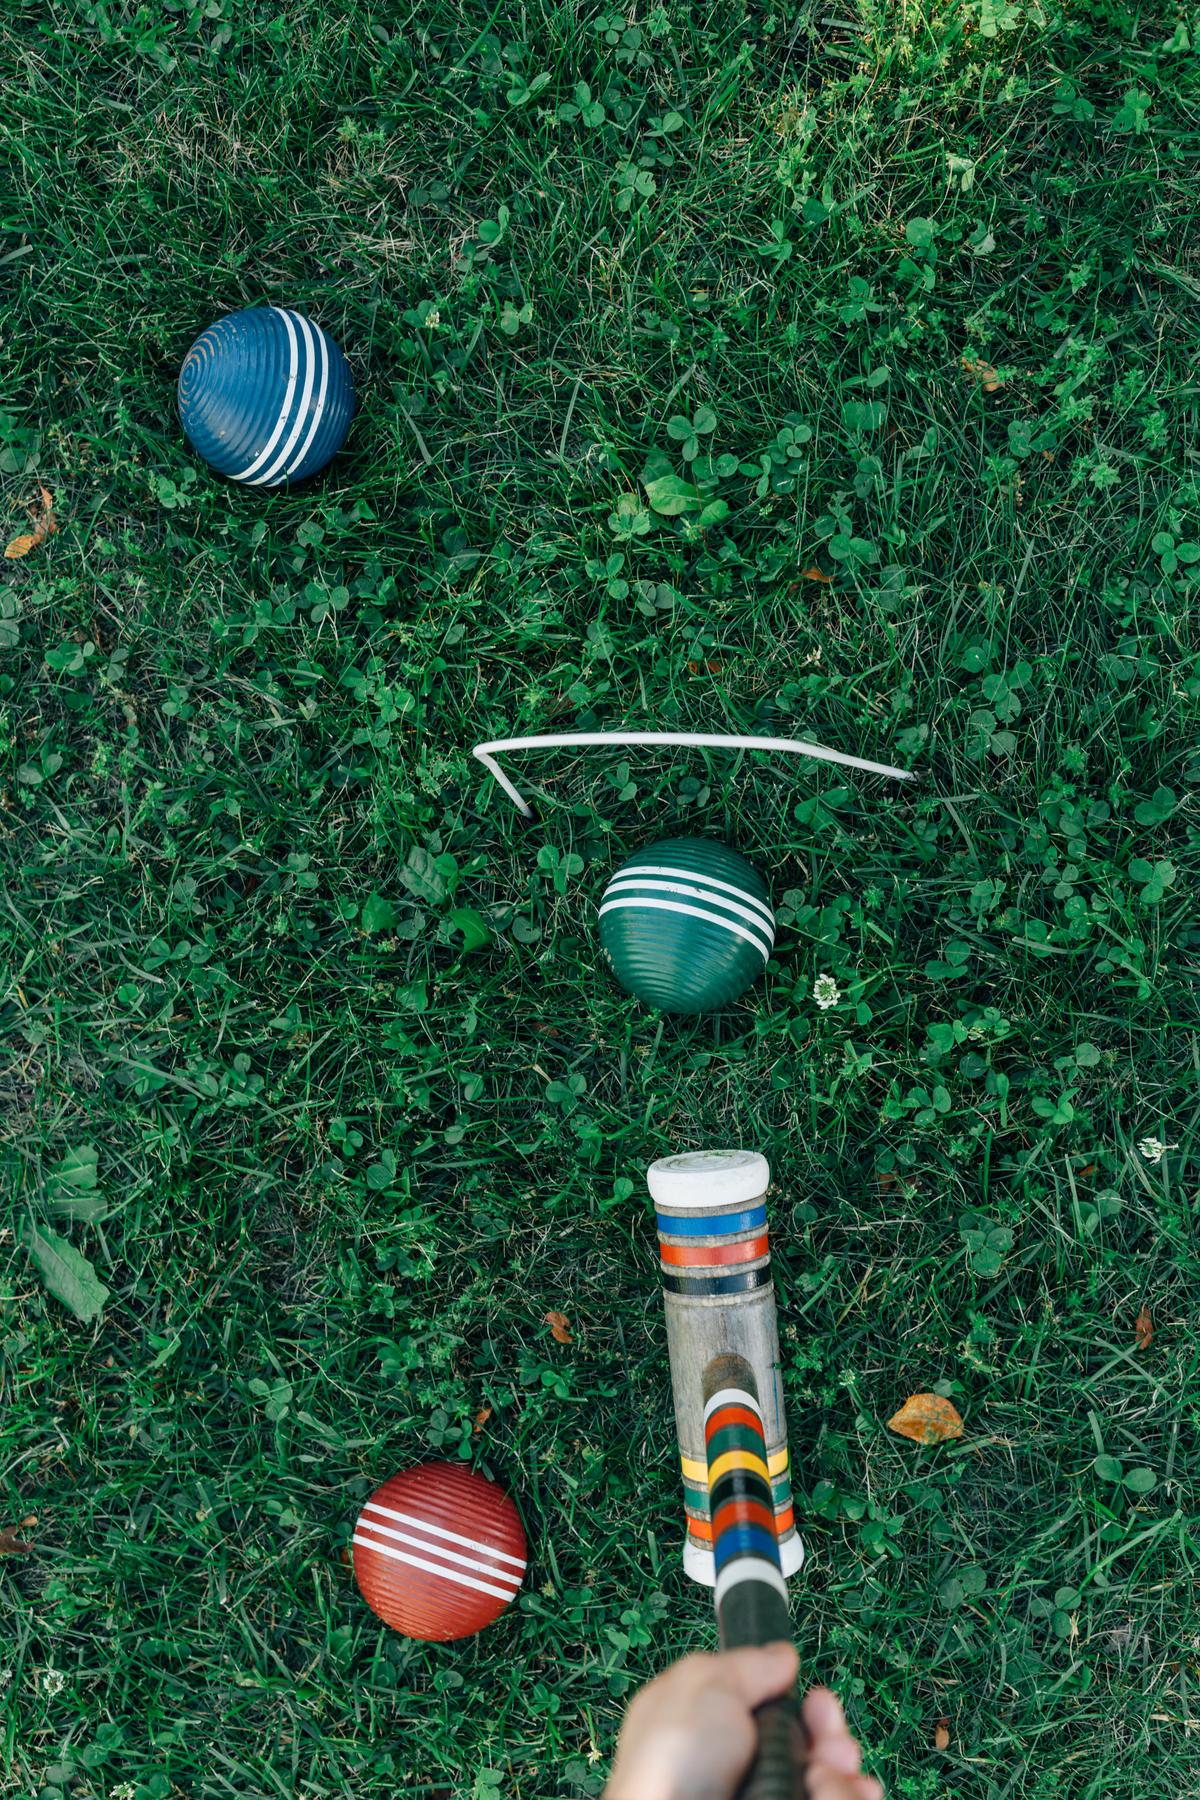 Illustration depicting players playing croquet in a garden